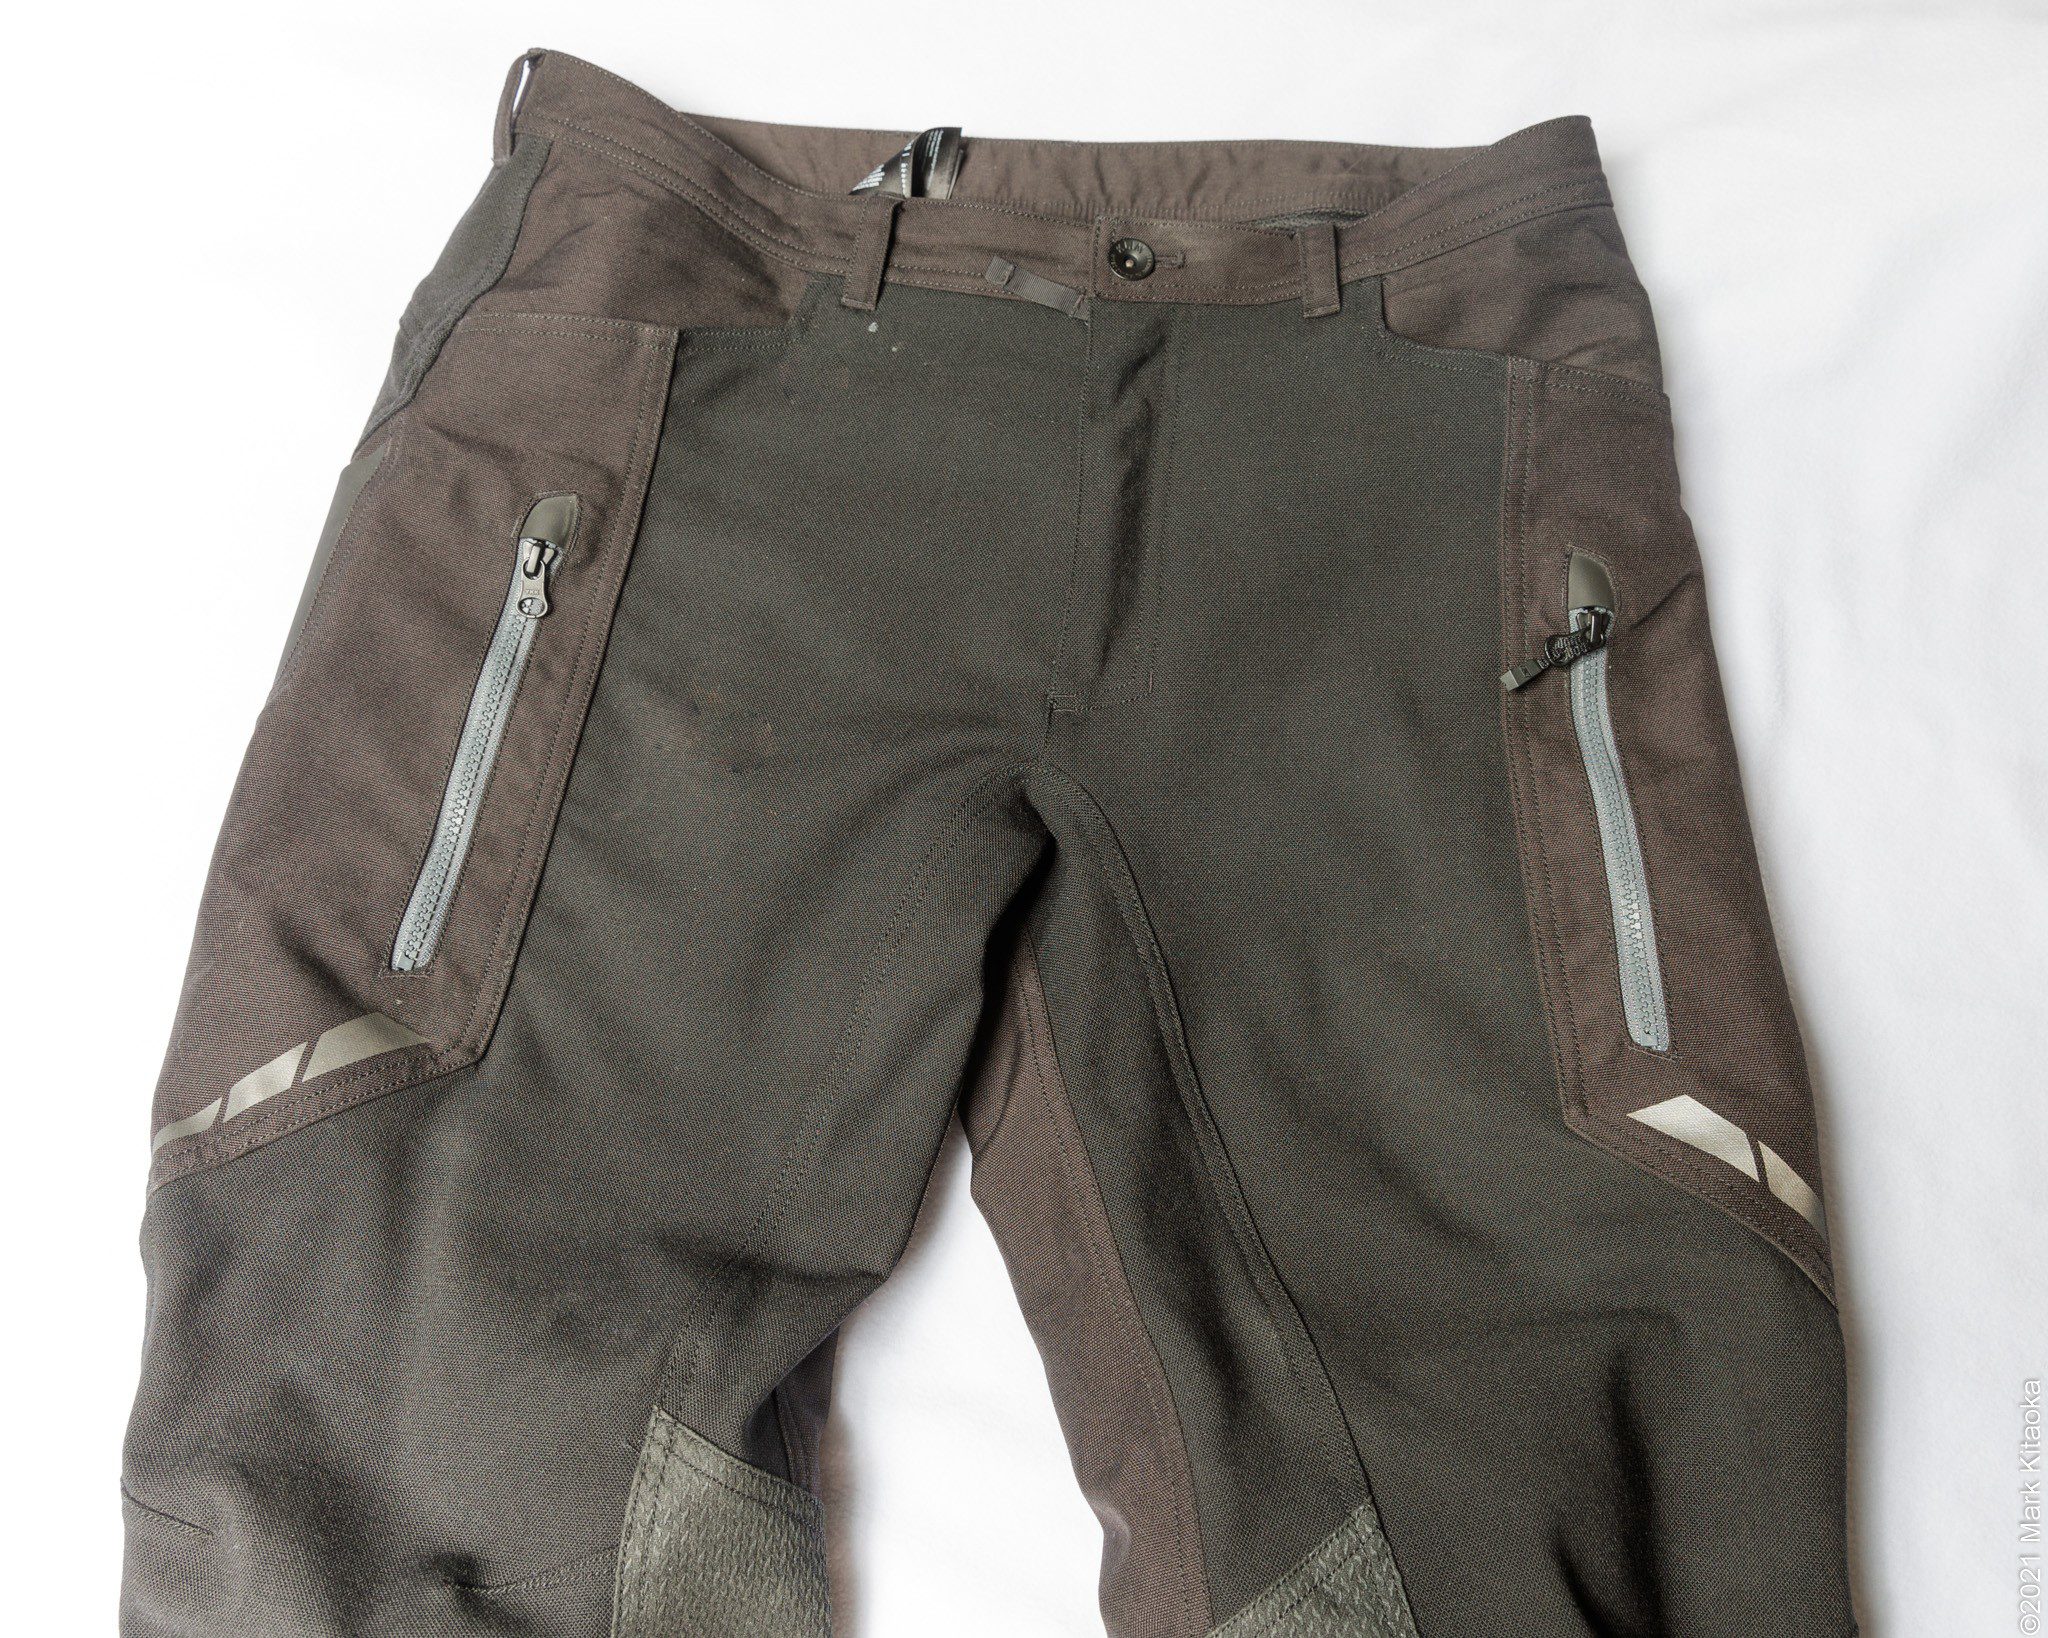 Front view of the Klim Marrakesh pants